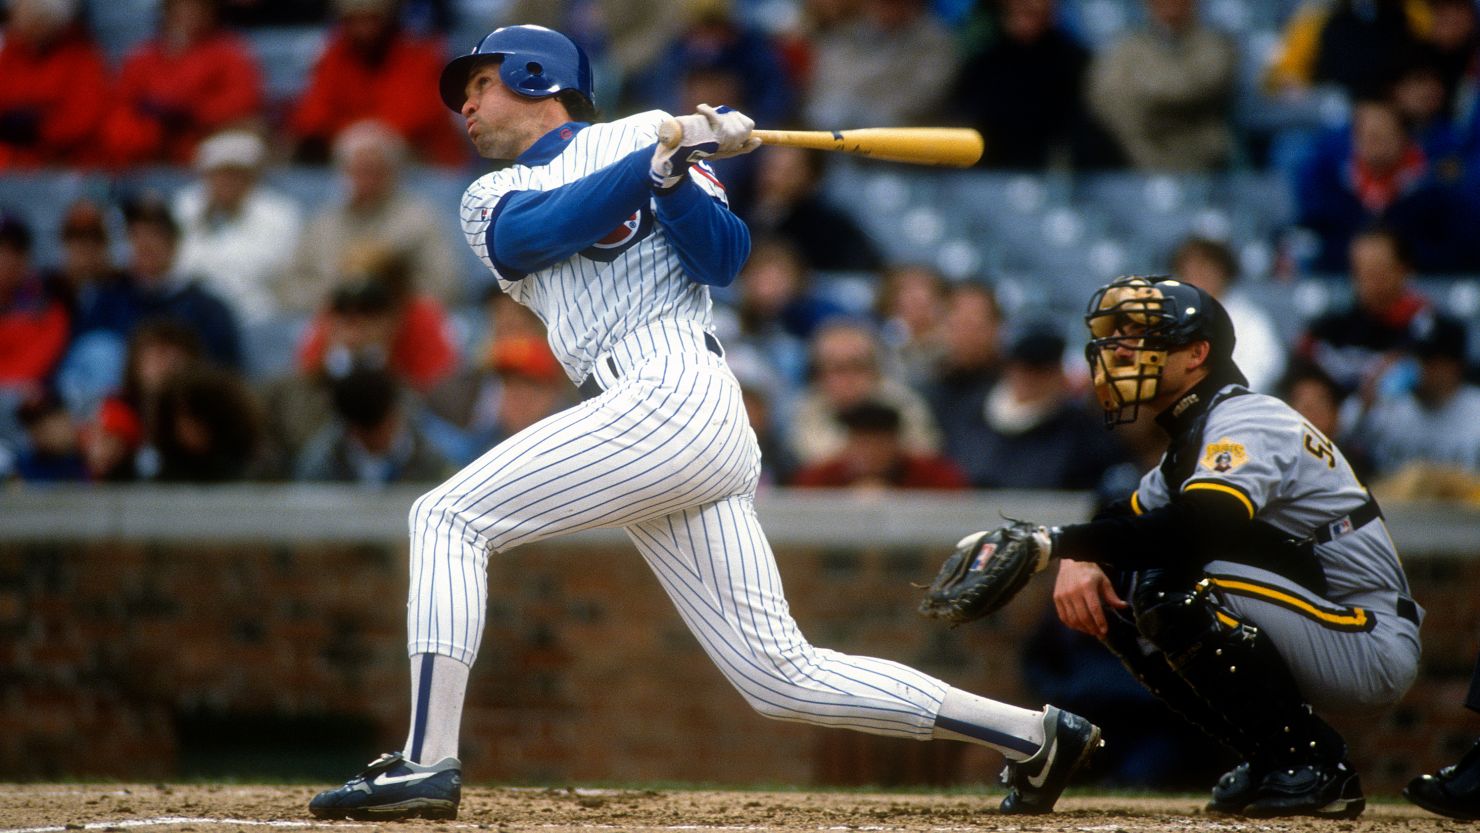 Ryne Sandberg #23 of the Chicago Cubs bats against the Pittsburgh Pirates during a Major League Baseball game circa 1992 at Wrigley Field in Chicago, Illinois.